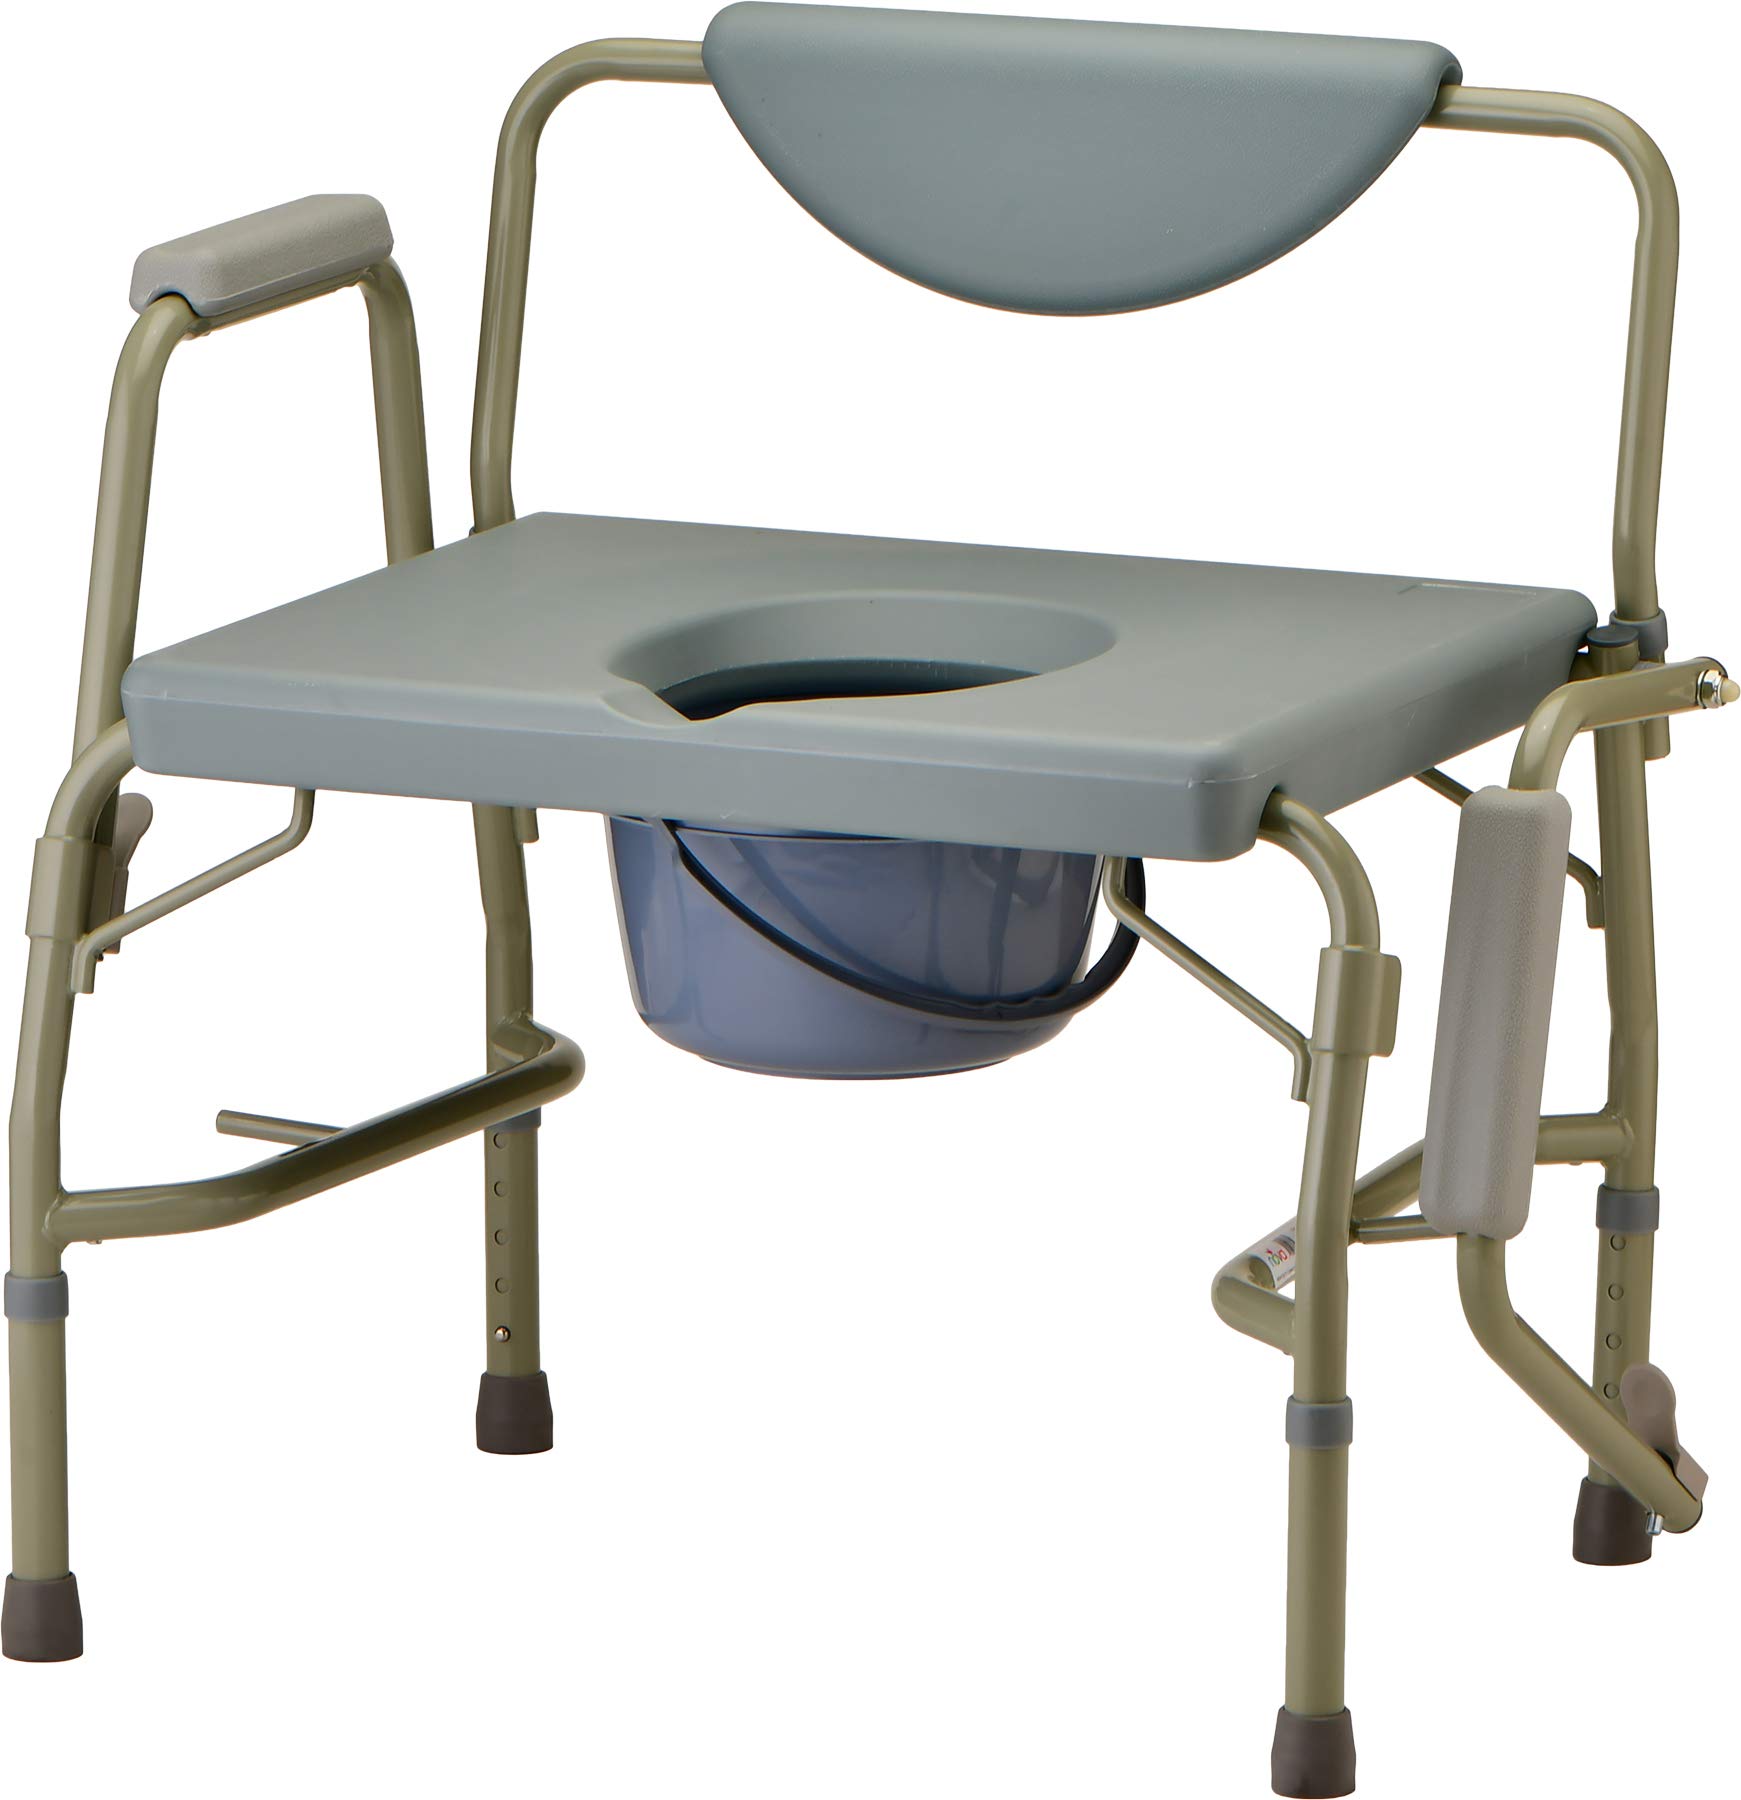 Bedside Commodes – A Complete Guide to Types, Features, and Usage